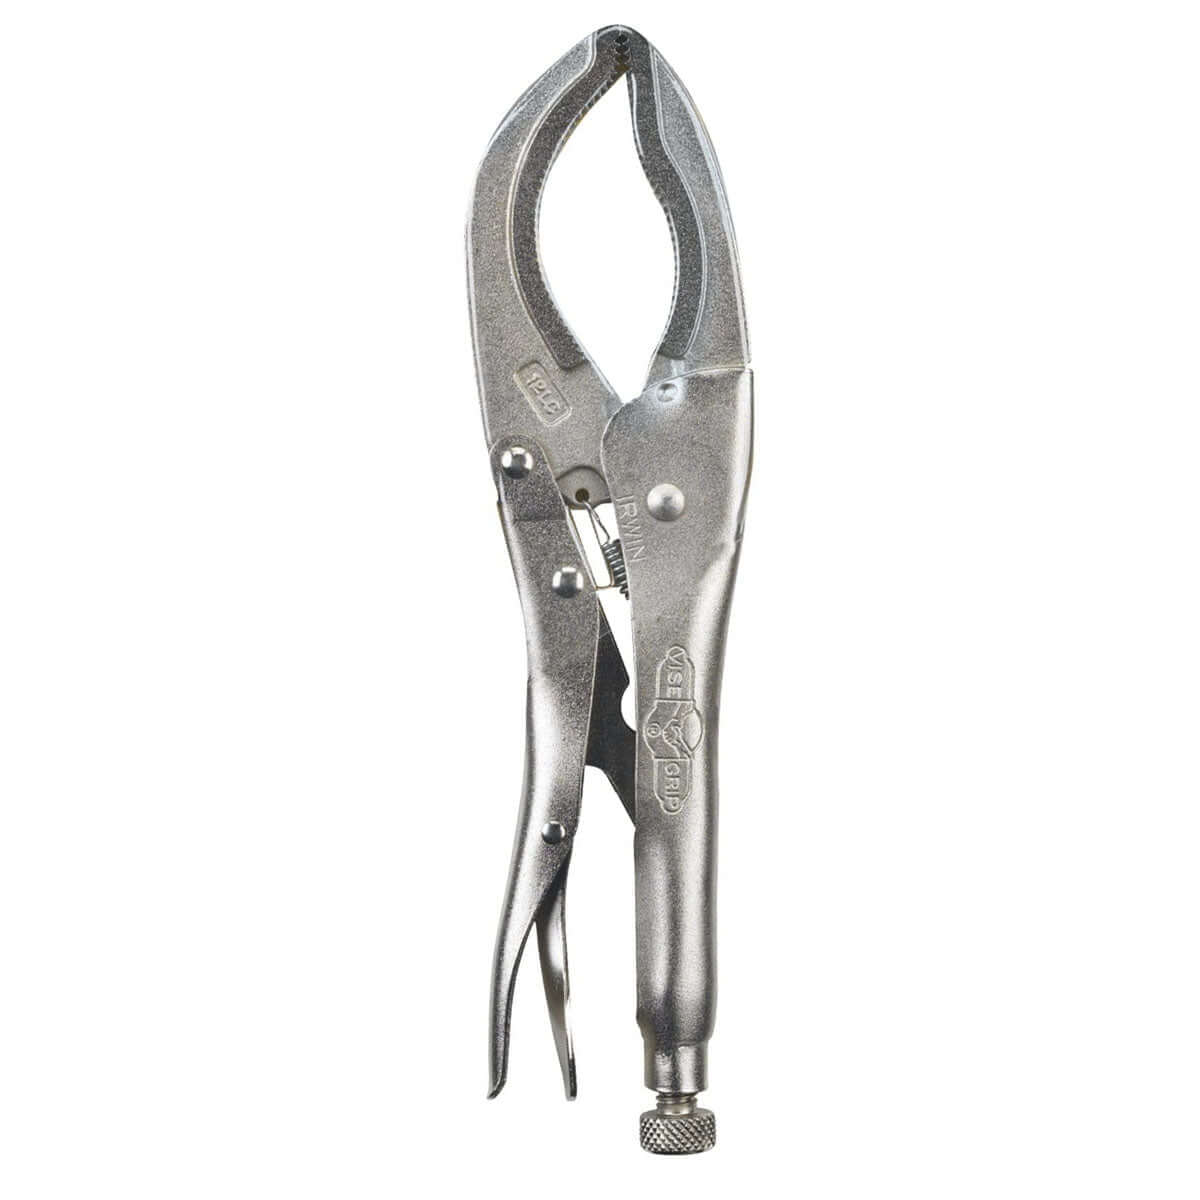 Monster&Master Long Nose Vise Grip Locking Pliers Set 12 inch, Extended  Long Handle Vice Grip Pliers, Straight/45 Degree/80 Degree Angle Pliers for